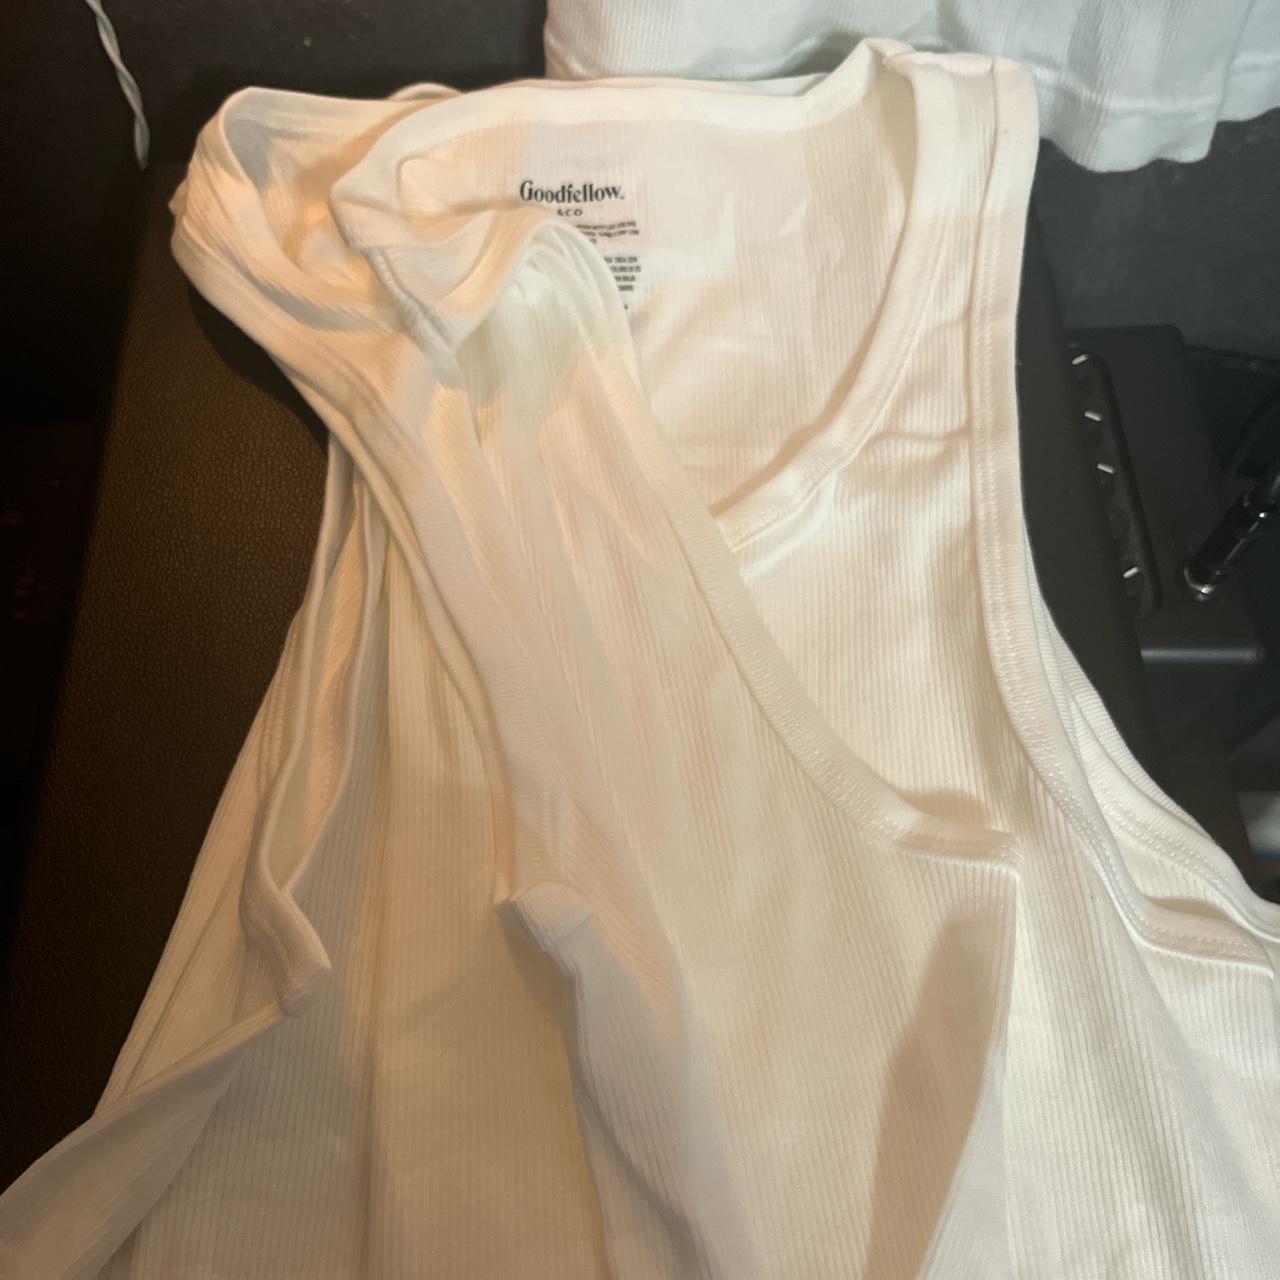 Goodfellow White Beater (Tank-Top) Size S Bought a - Depop